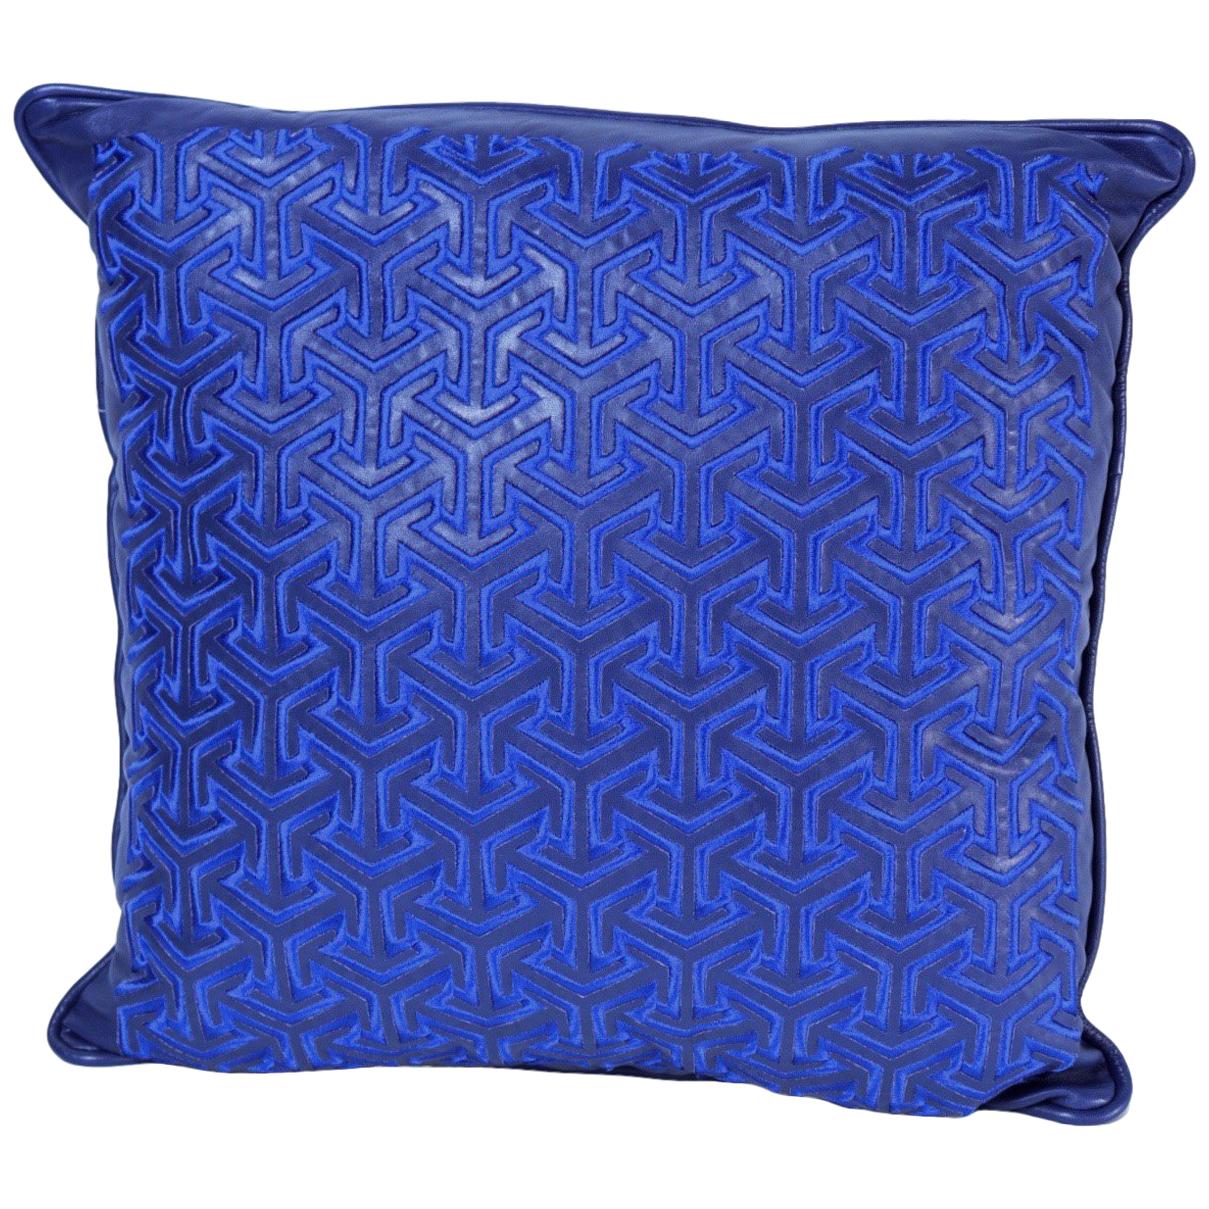 Blue Leather Embroidered Moroccan Throw Pillow